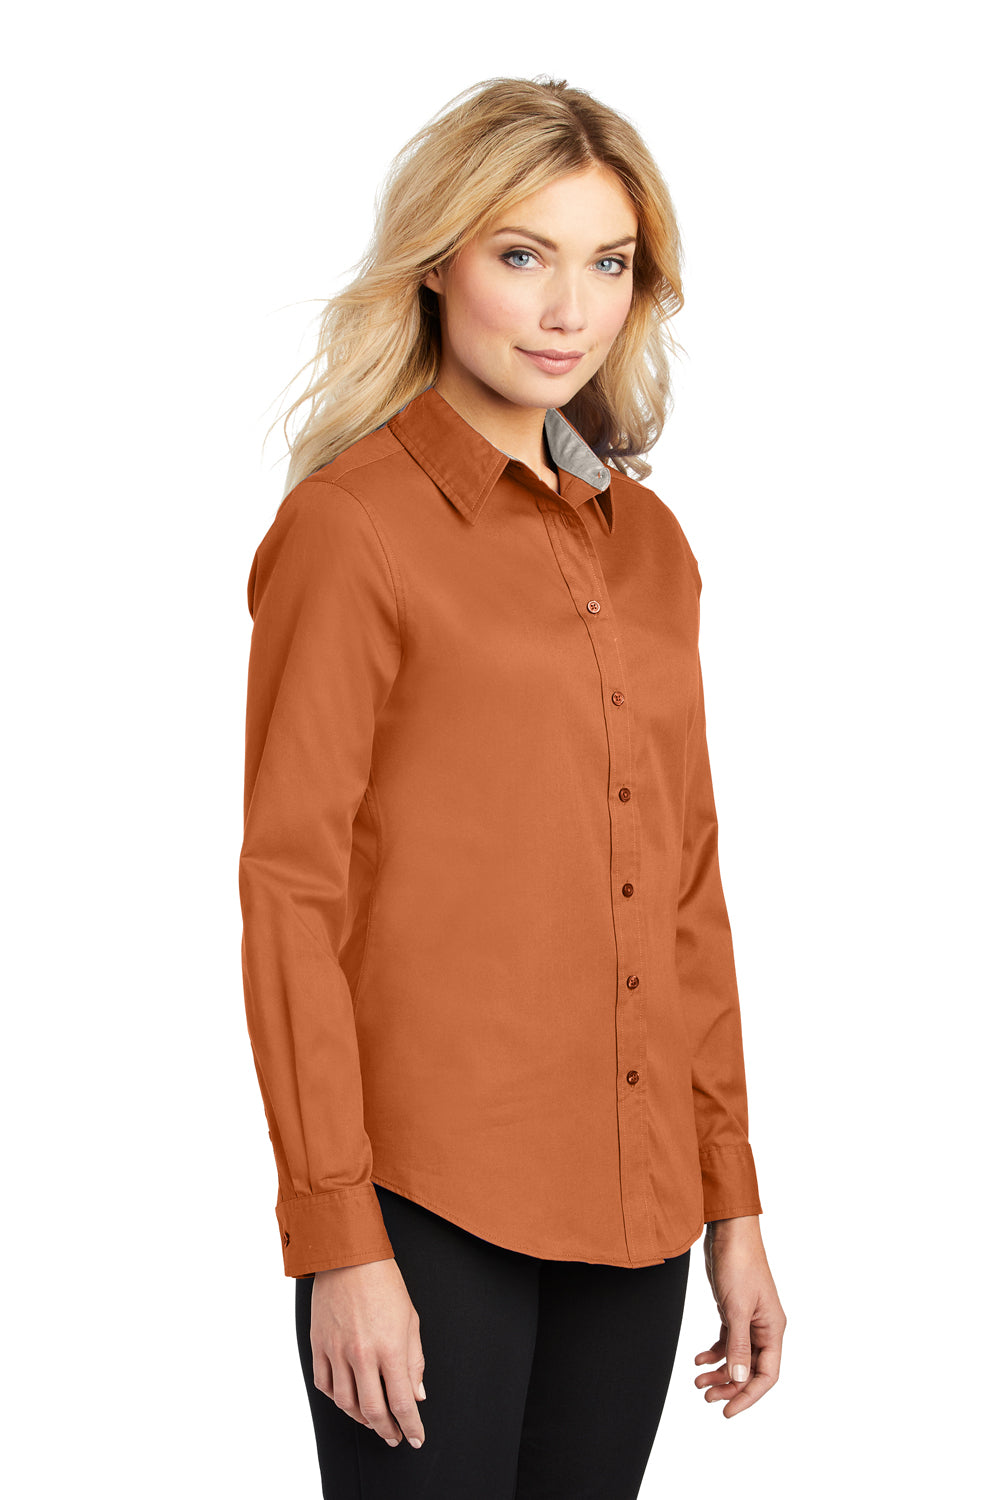 Port Authority L608 Womens Easy Care Wrinkle Resistant Long Sleeve Button Down Shirt Texas Orange 3Q